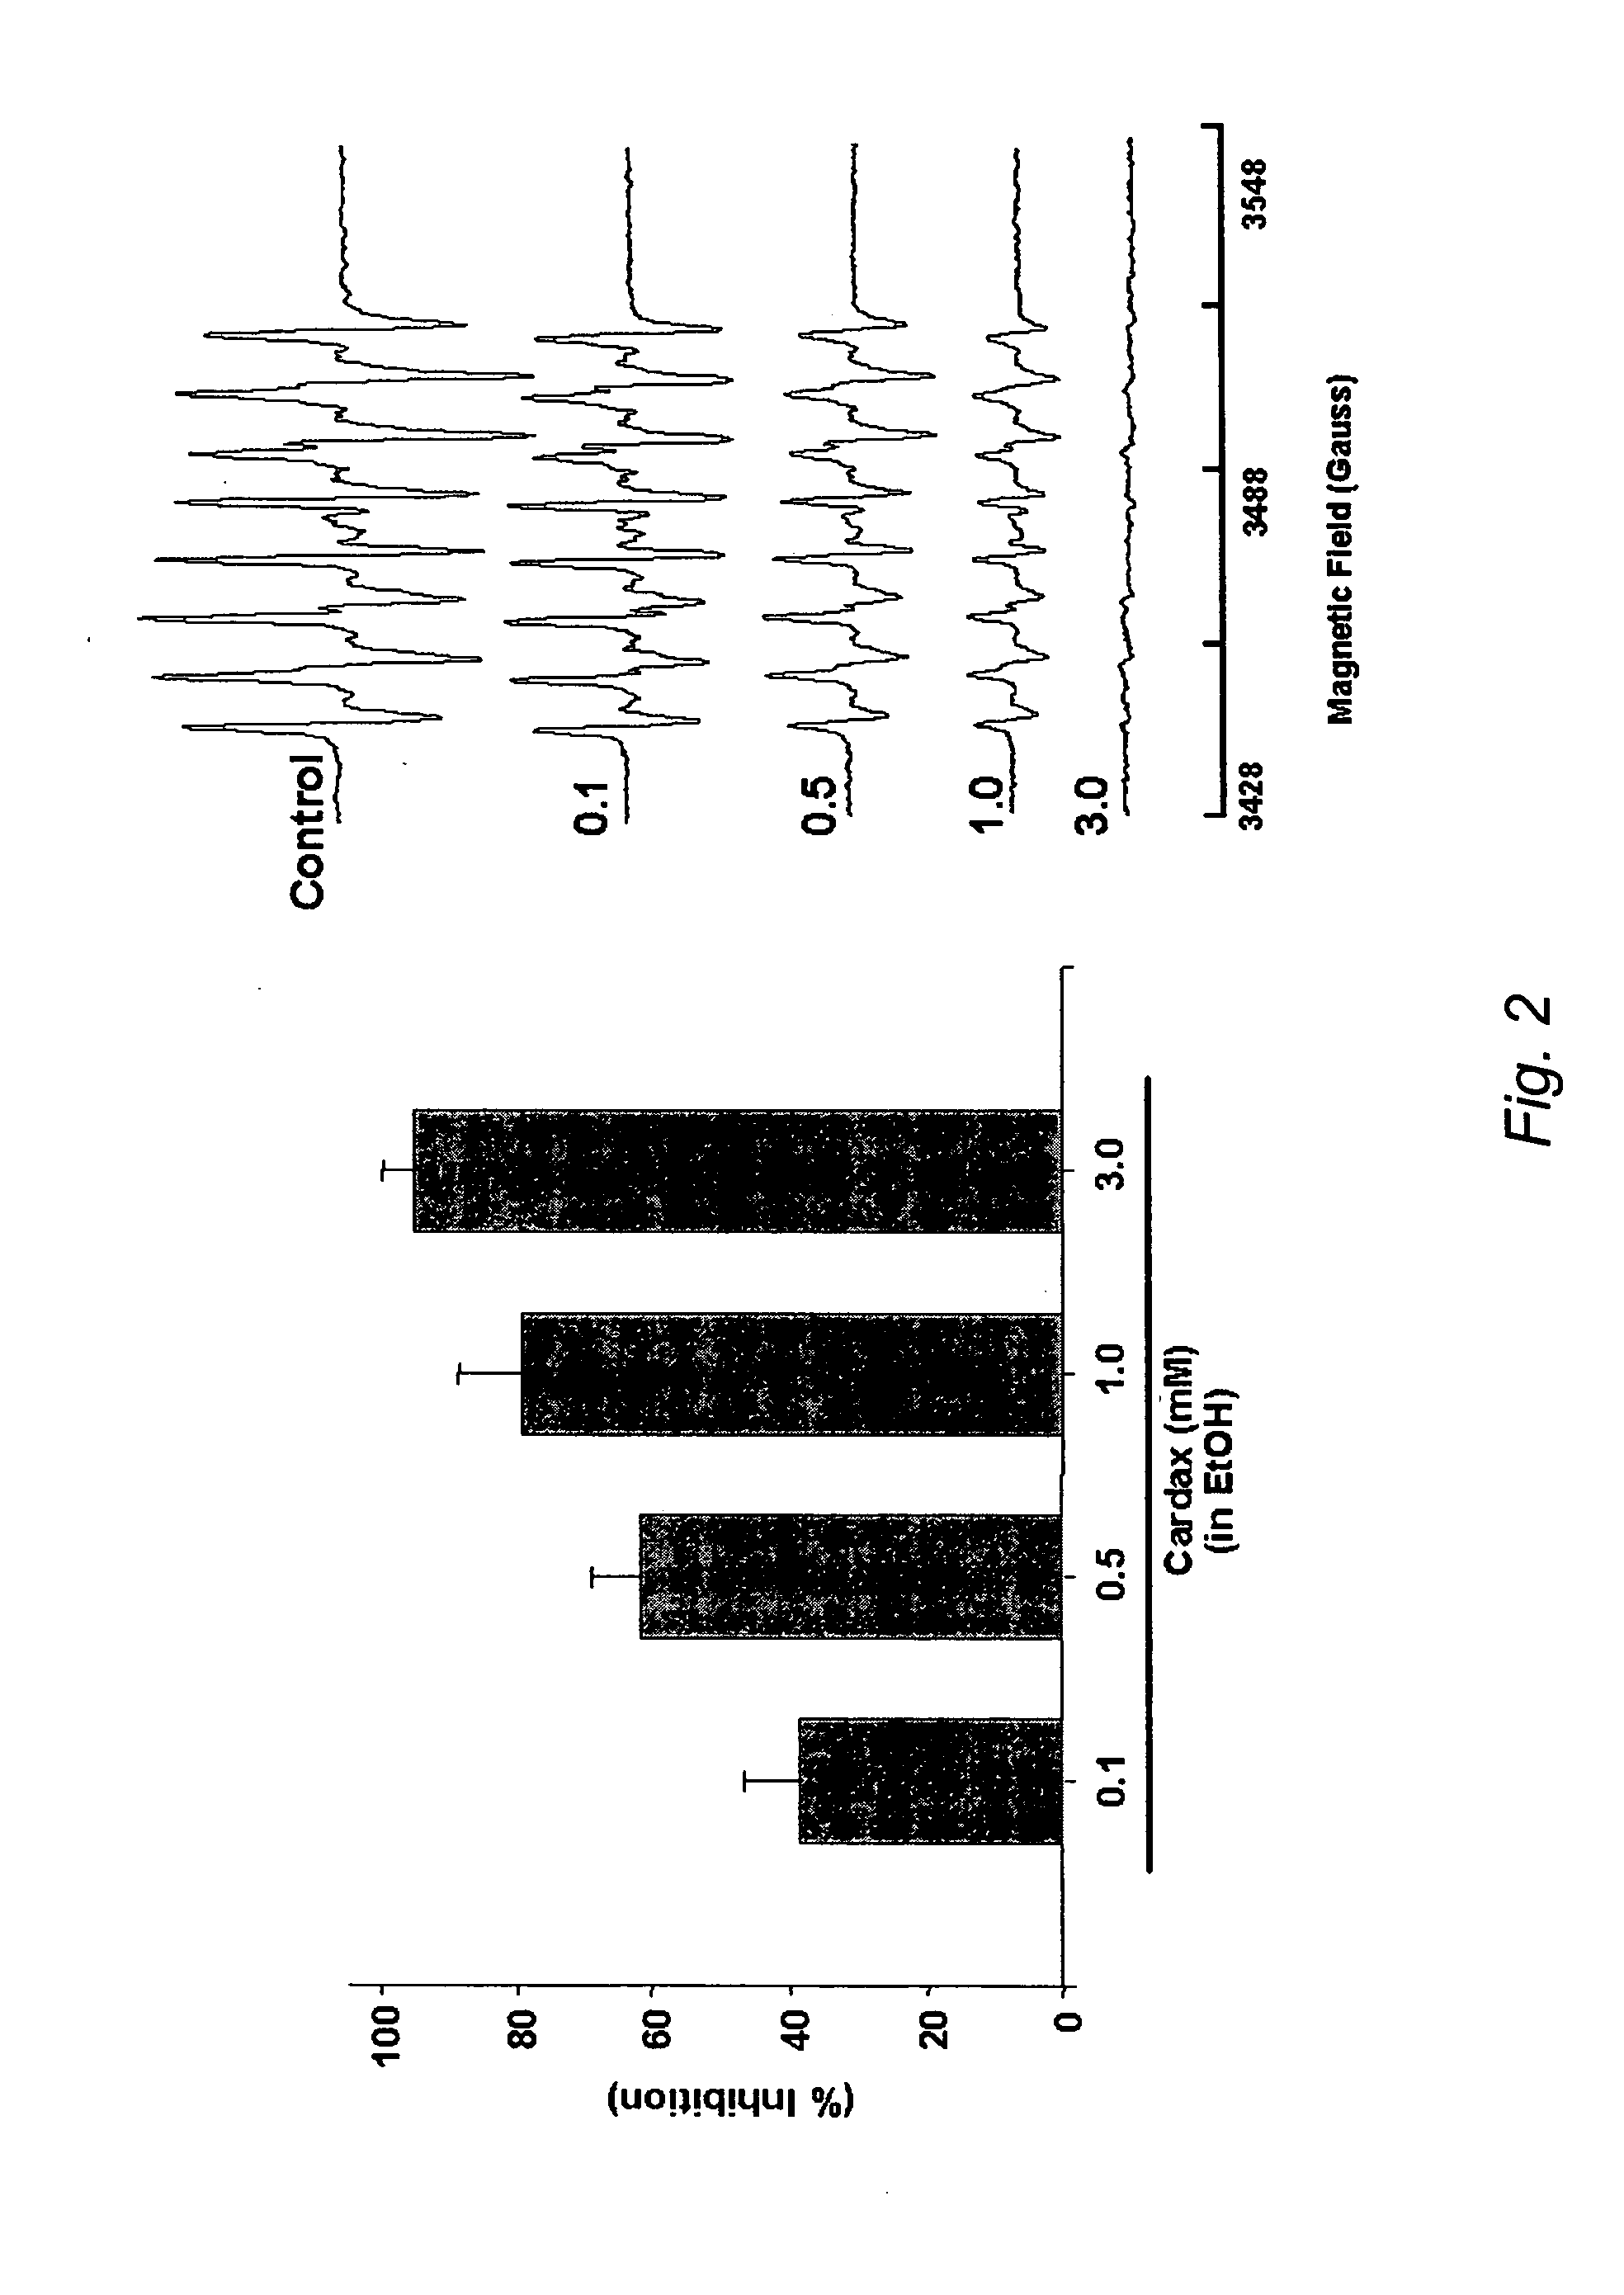 Carotenoid ether analogs or derivatives for the inhibition and amelioration of liver disease